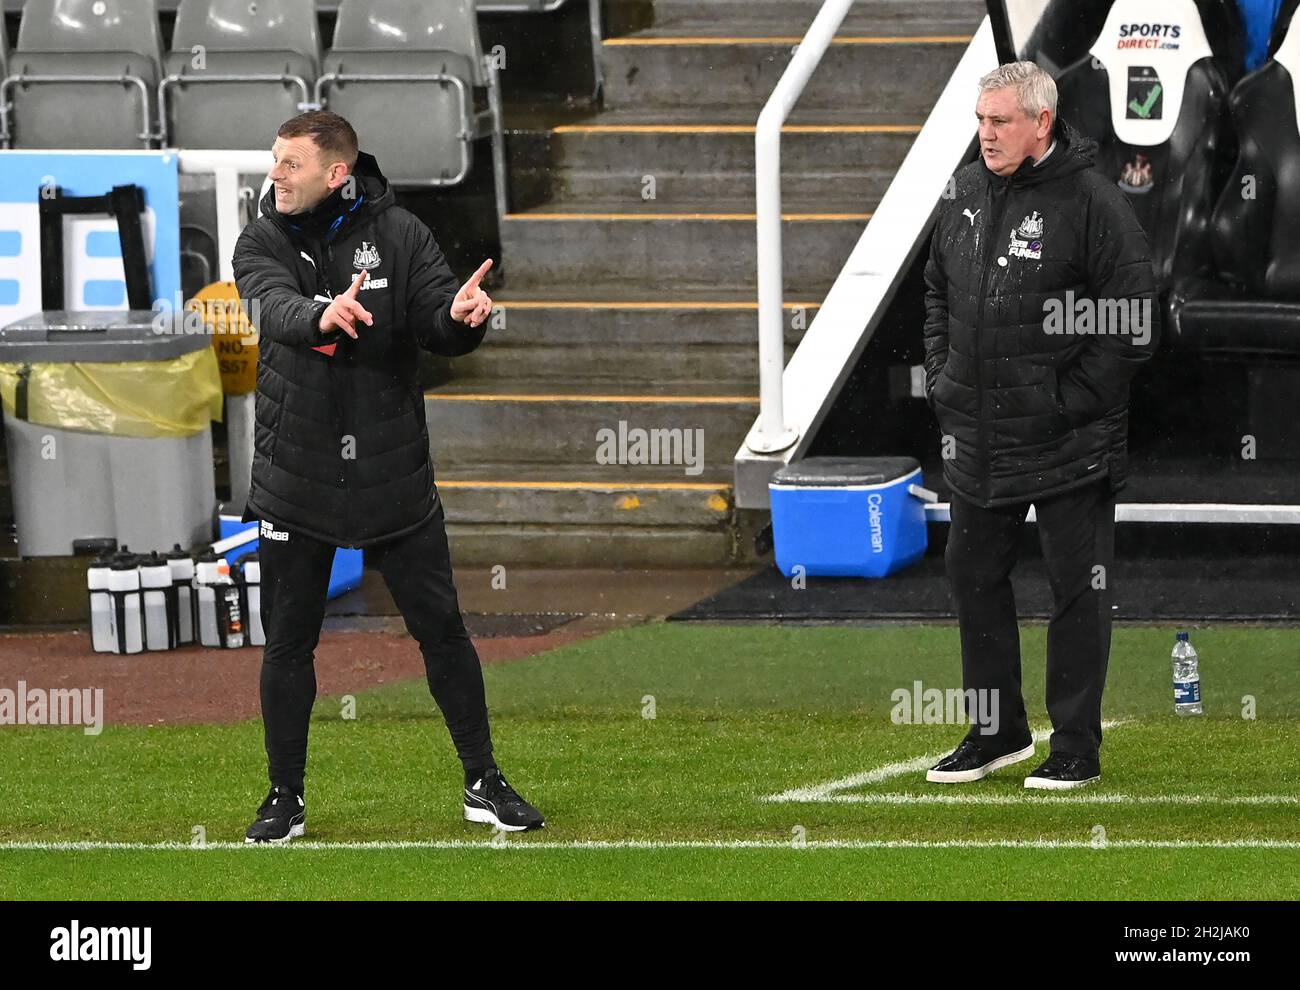 File photo dated 02-02-2021 of Newcastle united assistant manager Graeme Jones (left) and manager Steve Bruce. Newcastle interim boss Graeme Jones has confirmed he has been asked to take charge of the next two Premier League games as the search for Steve Bruce's successor continues. Issue date: Friday October 22, 2021. Stock Photo